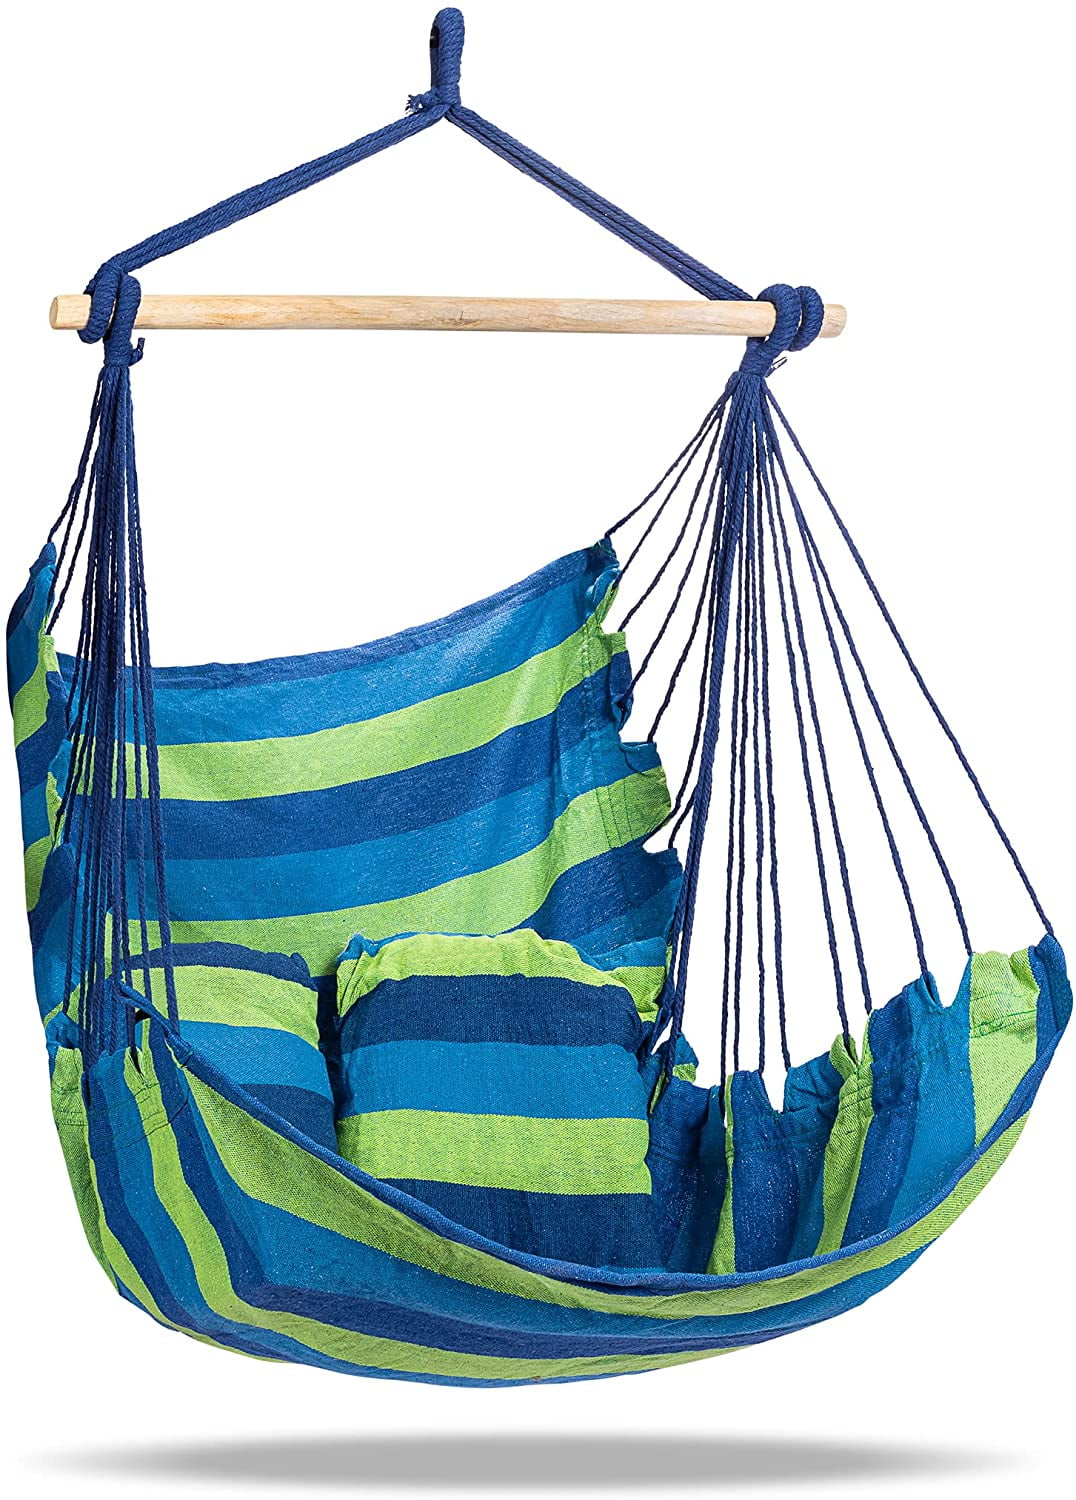 Boho Chair Swing picture image